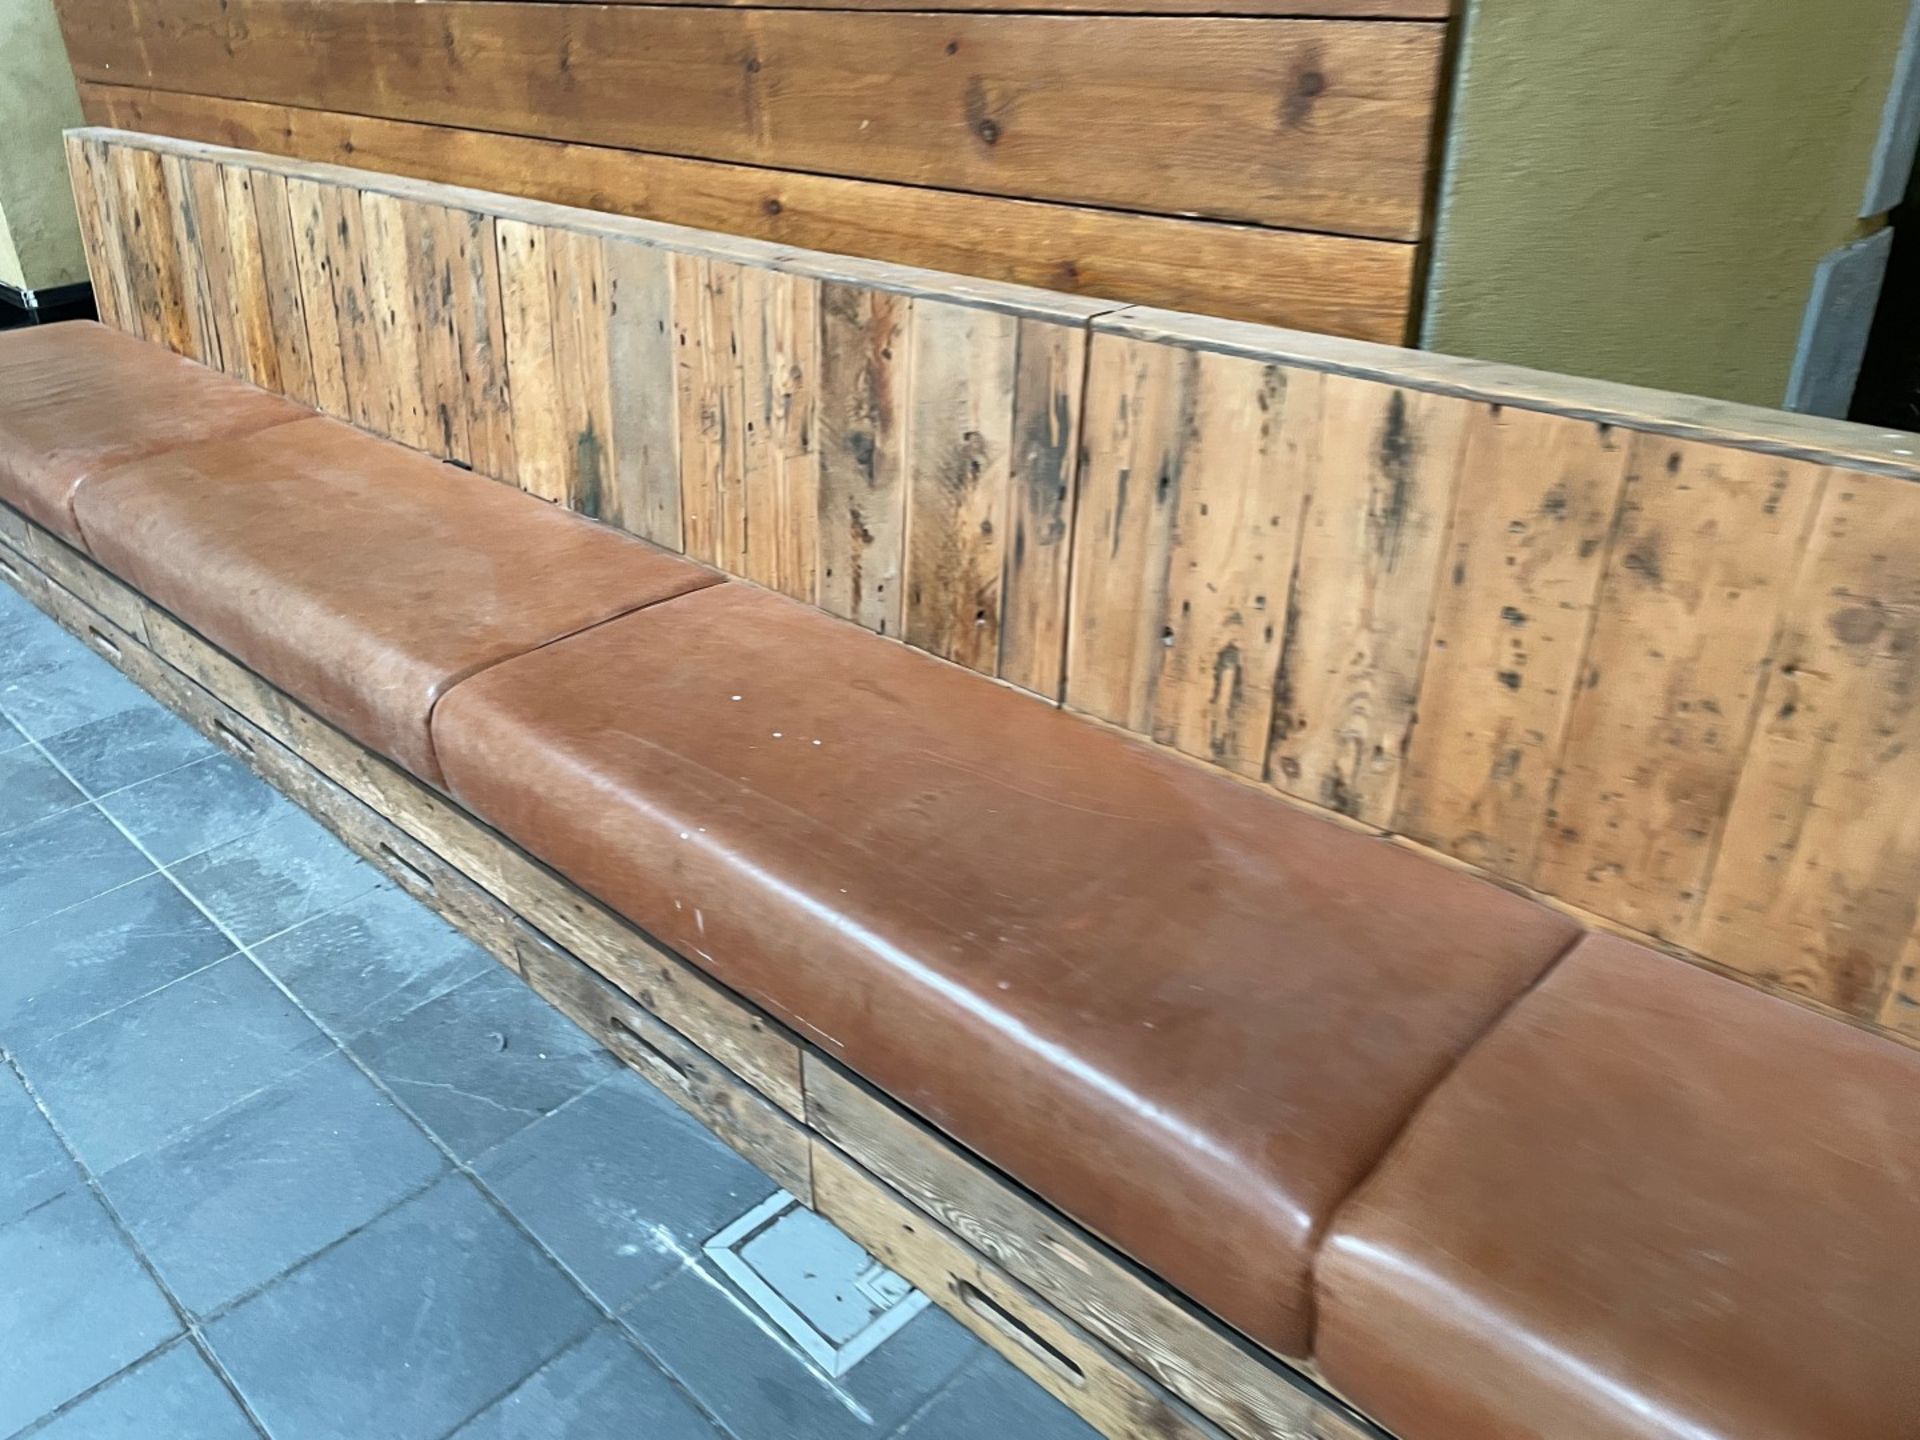 1 x Rustic Wooden Seating Bench Featuring Tan Leather Seat Pads - Suitable For Restaurants or Bars! - Image 4 of 12